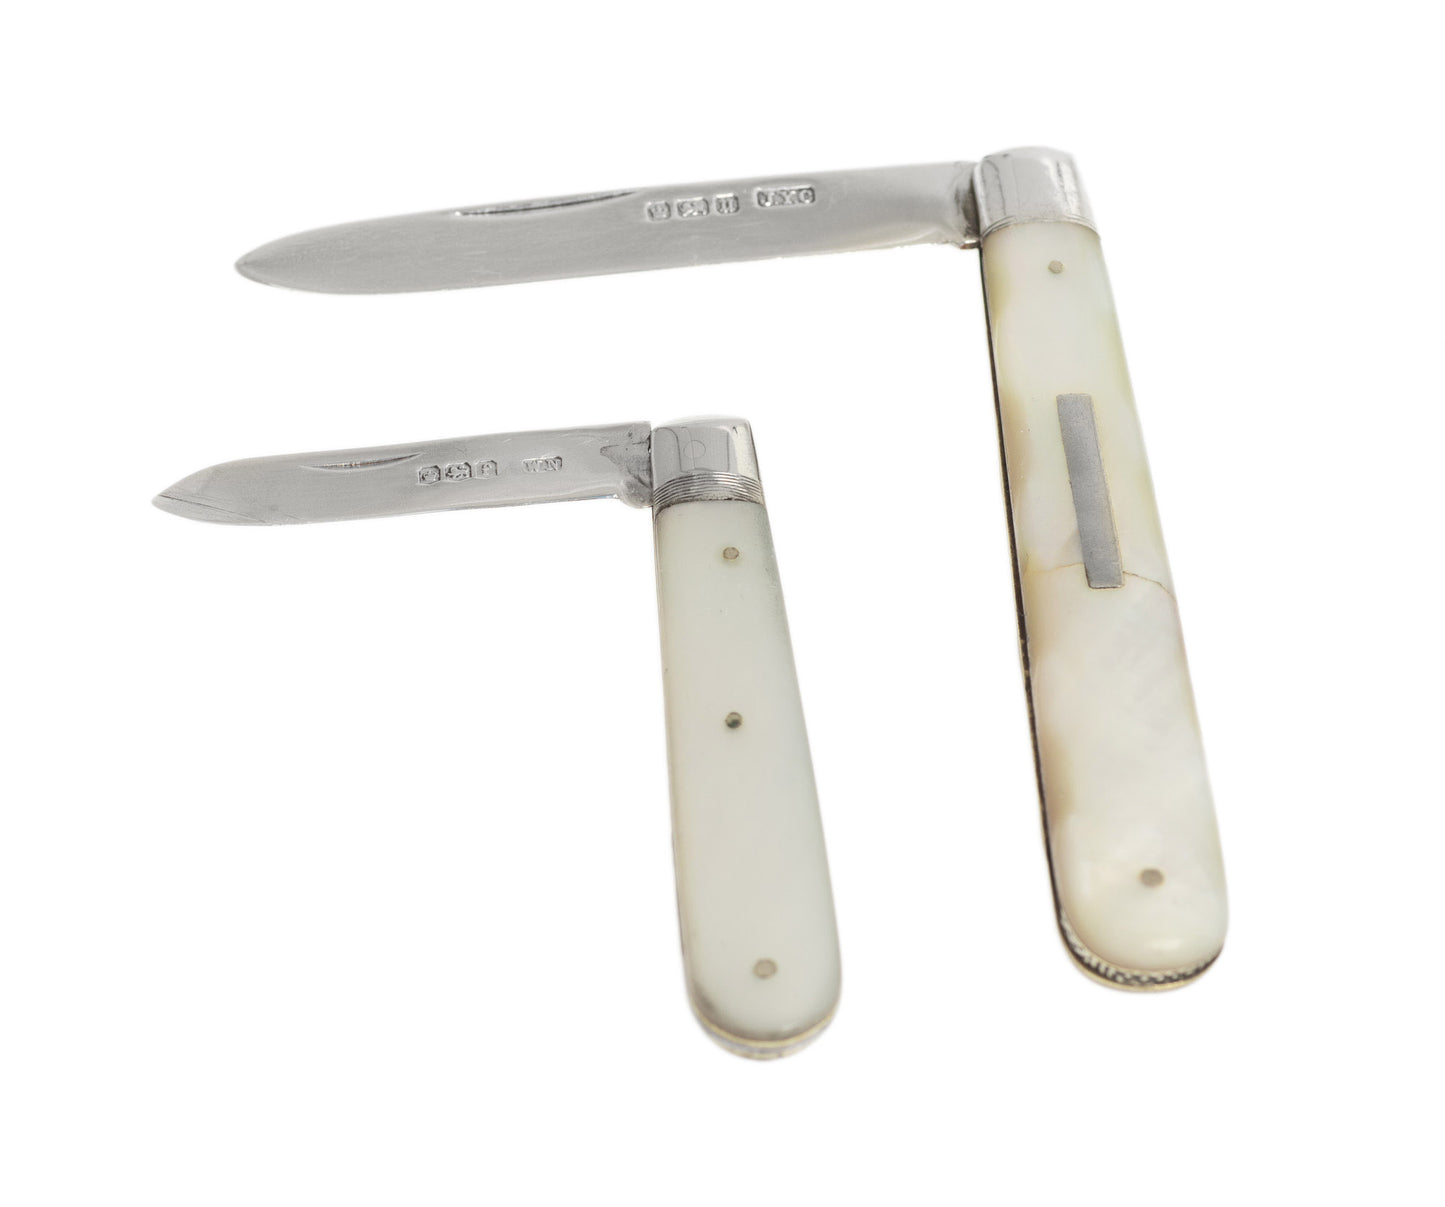 Two Antique Pocket Fruit Knives with Silver Blades & Mother of Pearl Handles (Code 2733)